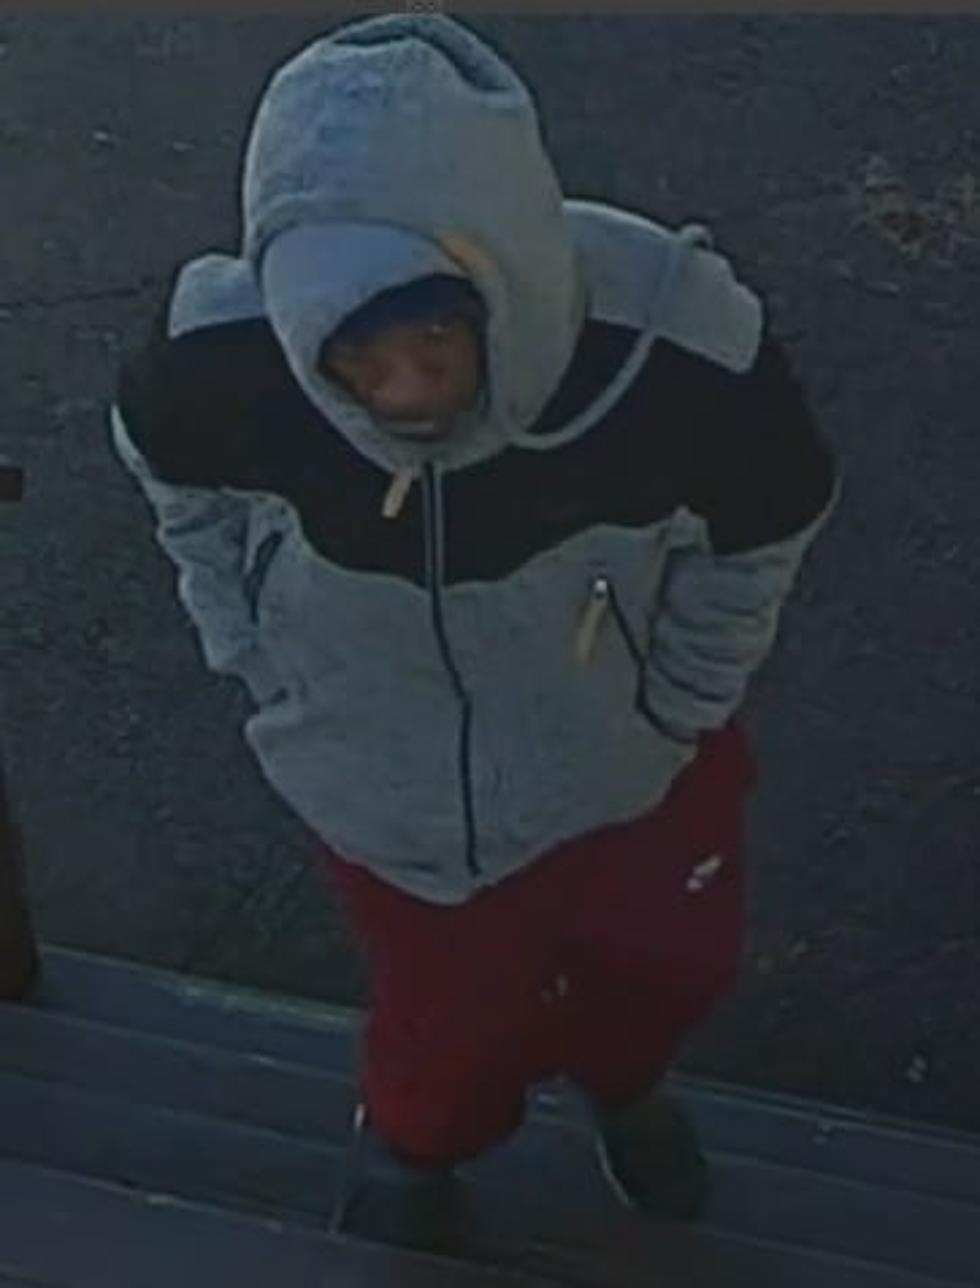 Rutgers University Police in New Brunswick, NJ looking for man behind burglary on Douglass Campus